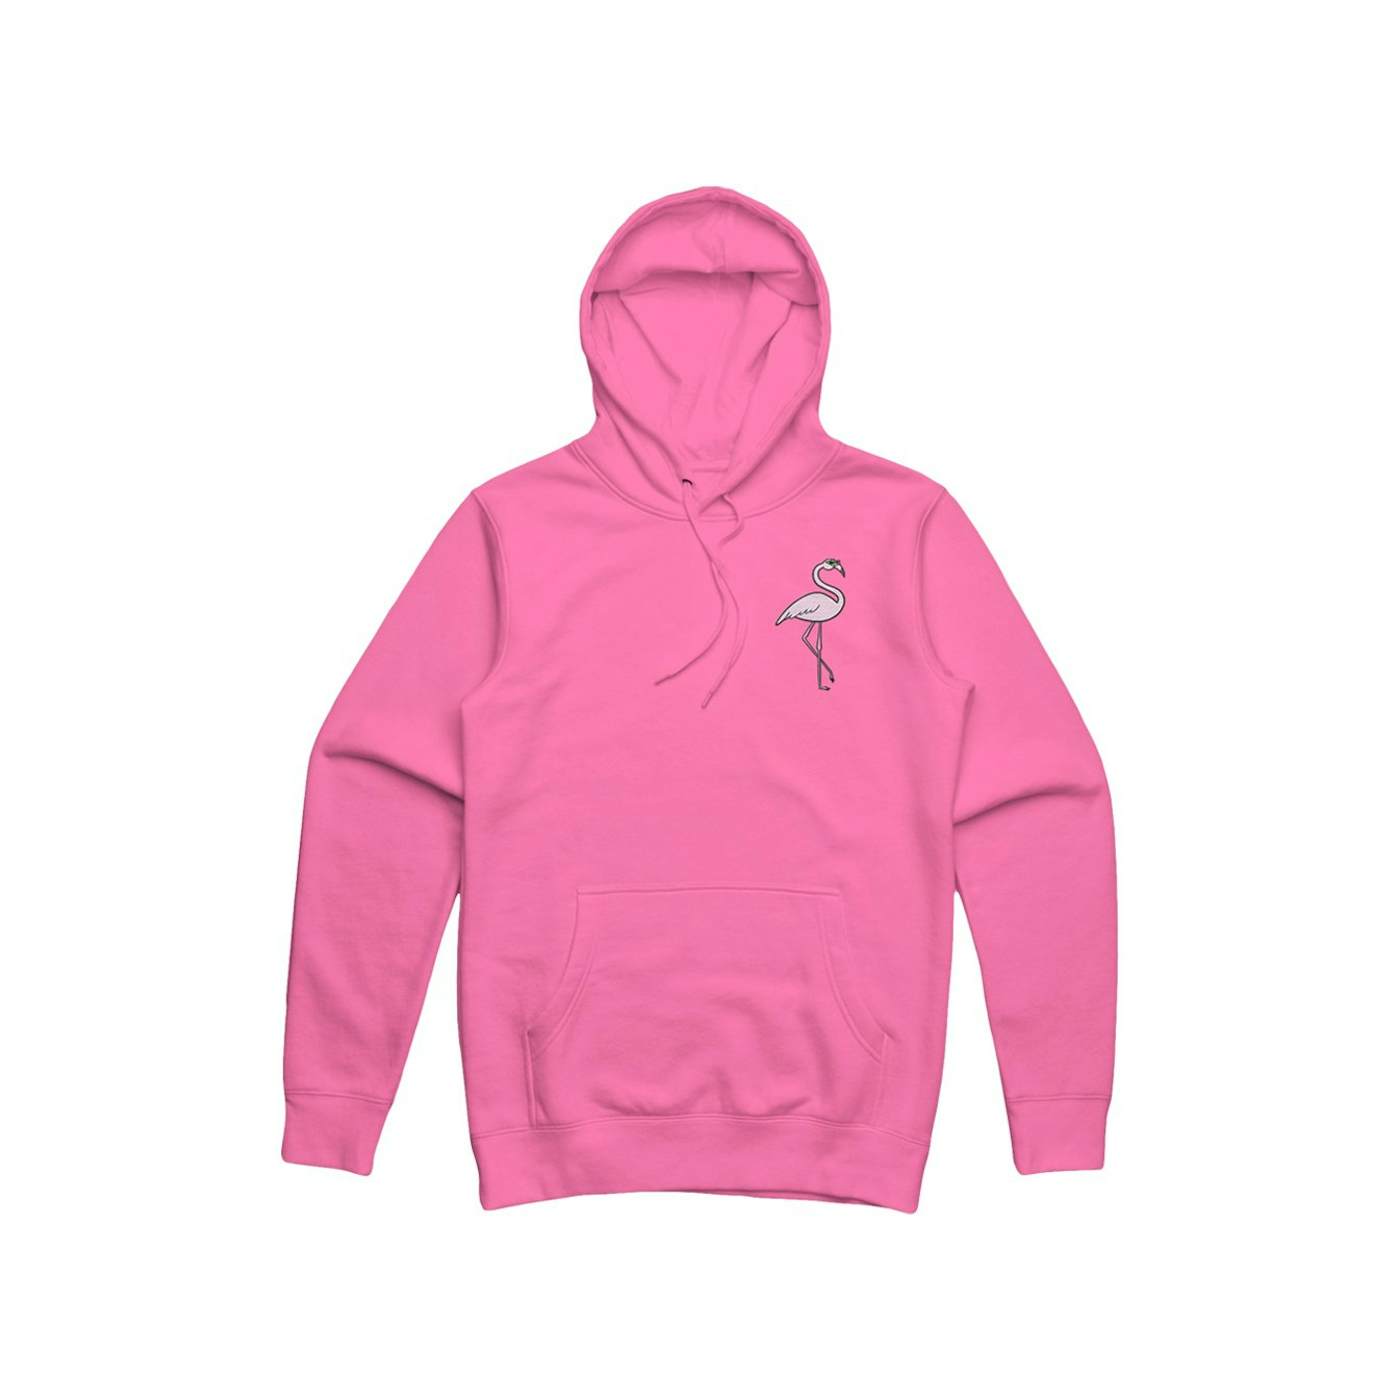 Roy Purdy Purdy World Flamingo Hoodie Embroidered